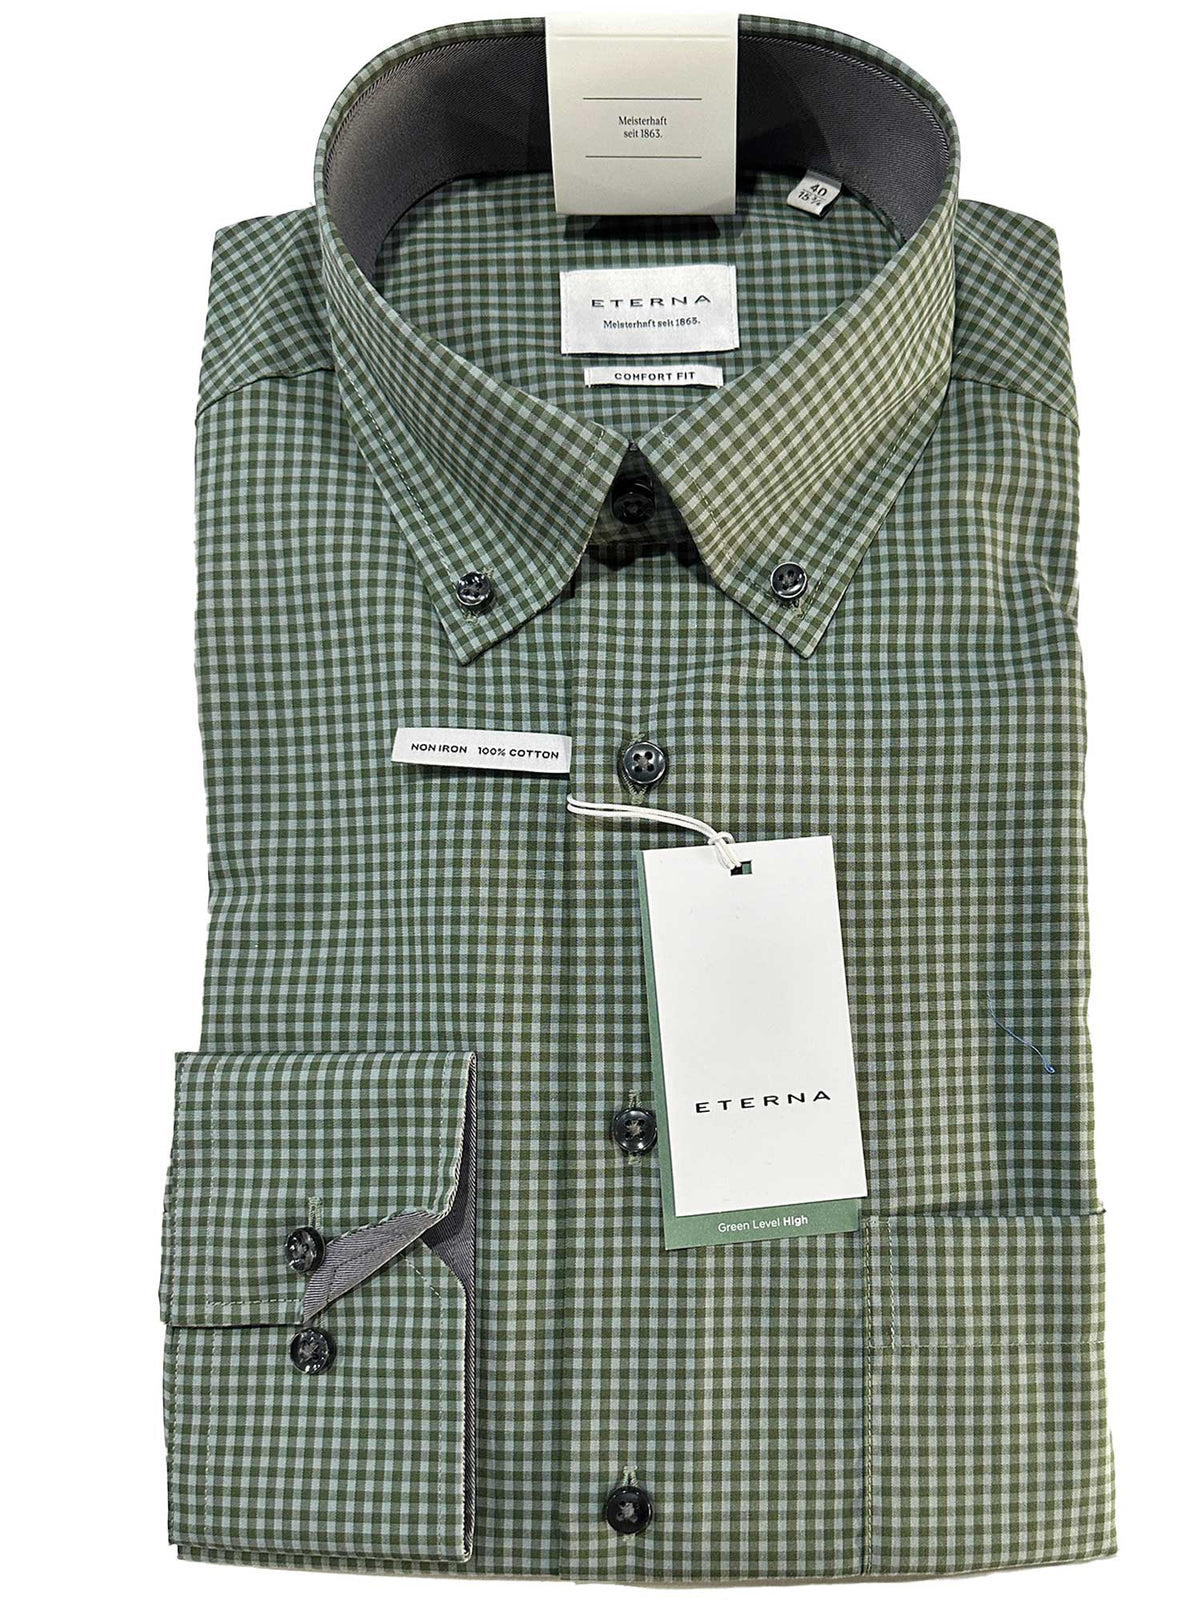 8913/40C  https://harrysformenswear.com.au/products/8913-40c  Limited Edition ETERNA MEN´S SHIRTS Fine Cotton Comfort Fit -(Right for the Bigger Fit Man) With Pocket Design in Germany Contrast Trim Non-Iron men's shirts are drip dry; in other words, the fabric straightens automatically after washing and does not need to be ironed.  Page title